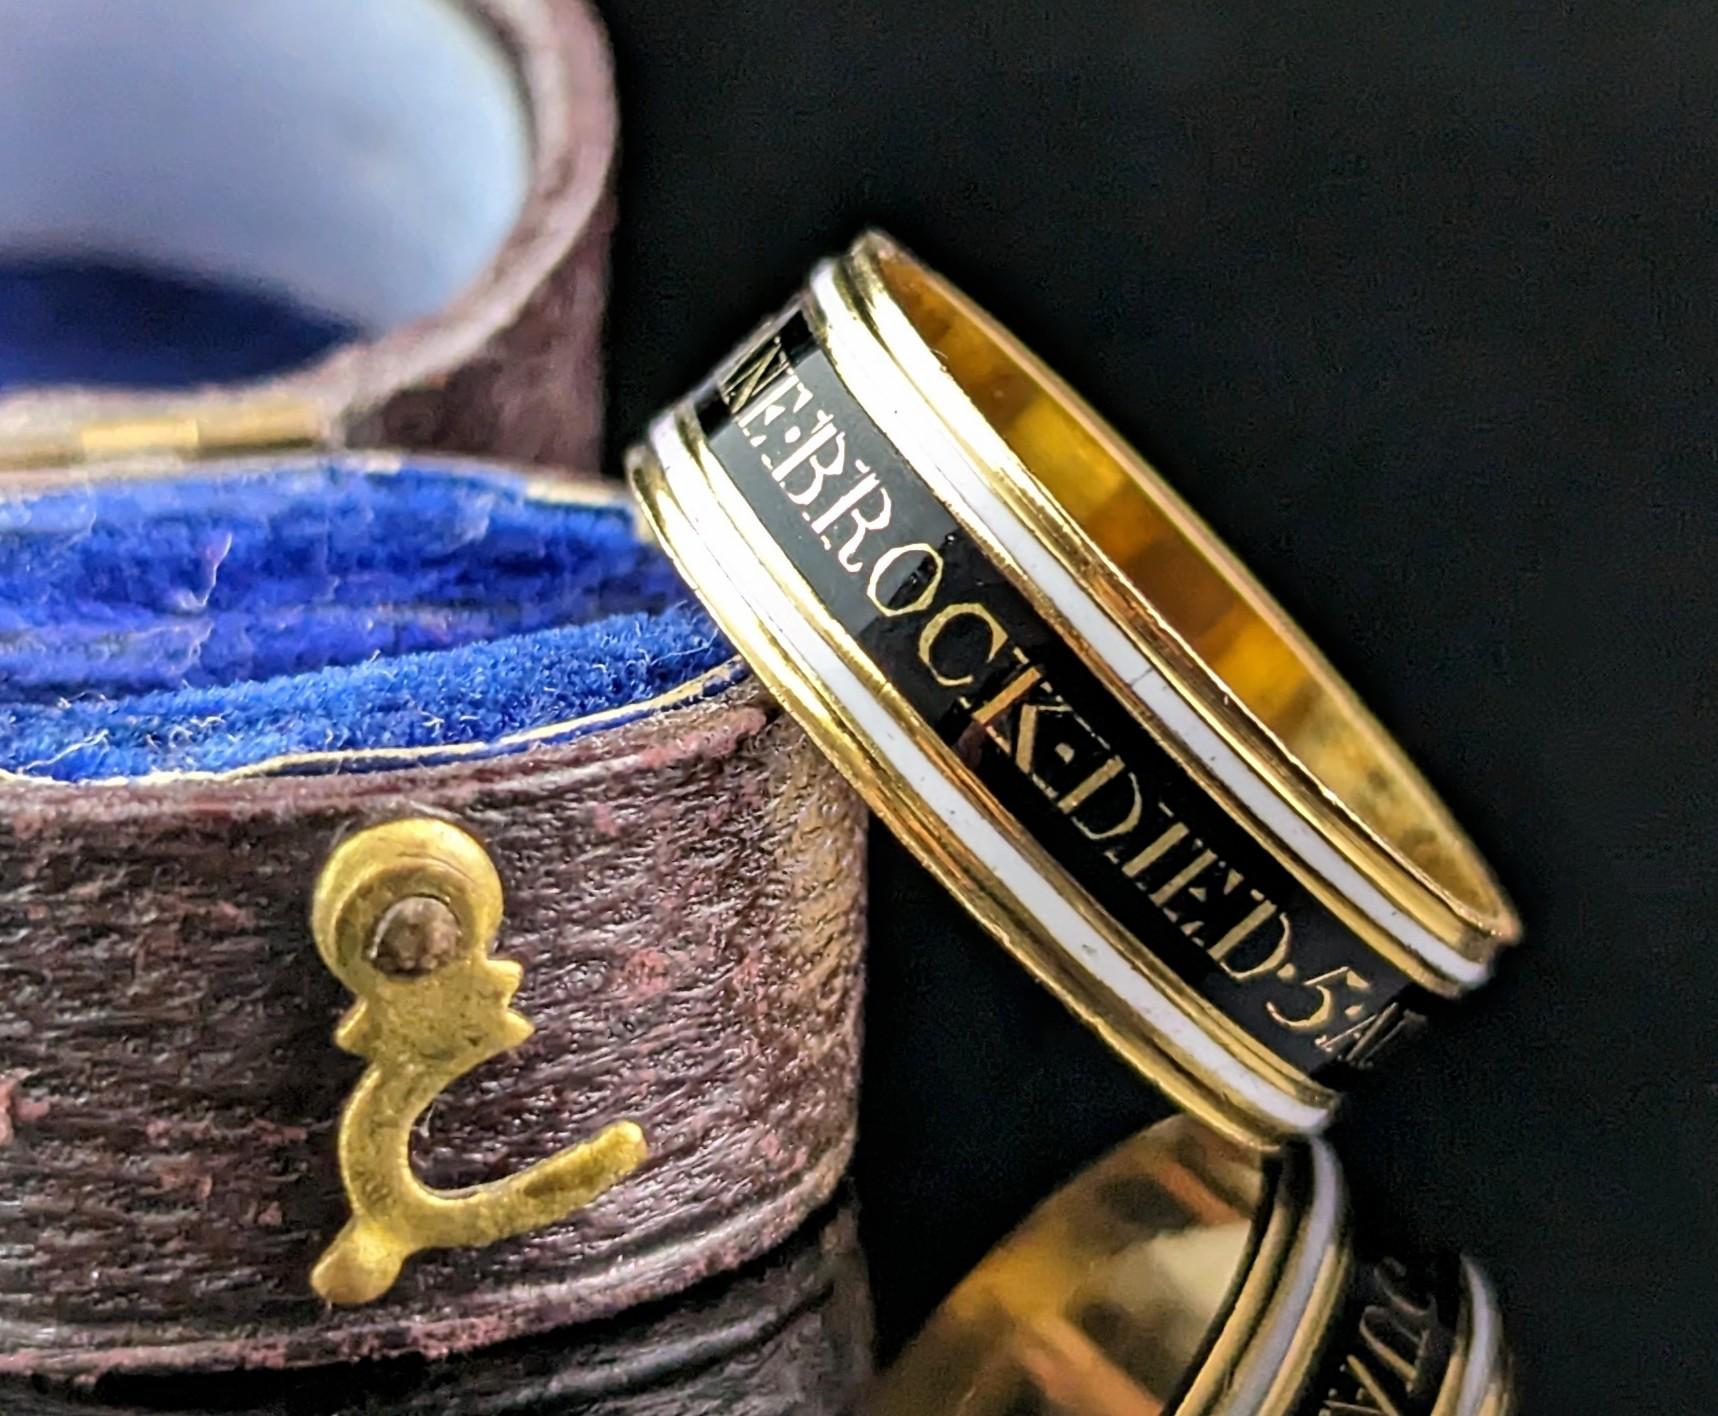 You cannot help but be enchanted by the beauty and emotion of this stunning antique Georgian mourning band ring.

The ring is a very rich 22kt yellow gold, enamelled in black with white enamel bands top and bottom.

The words picked out in gold tell